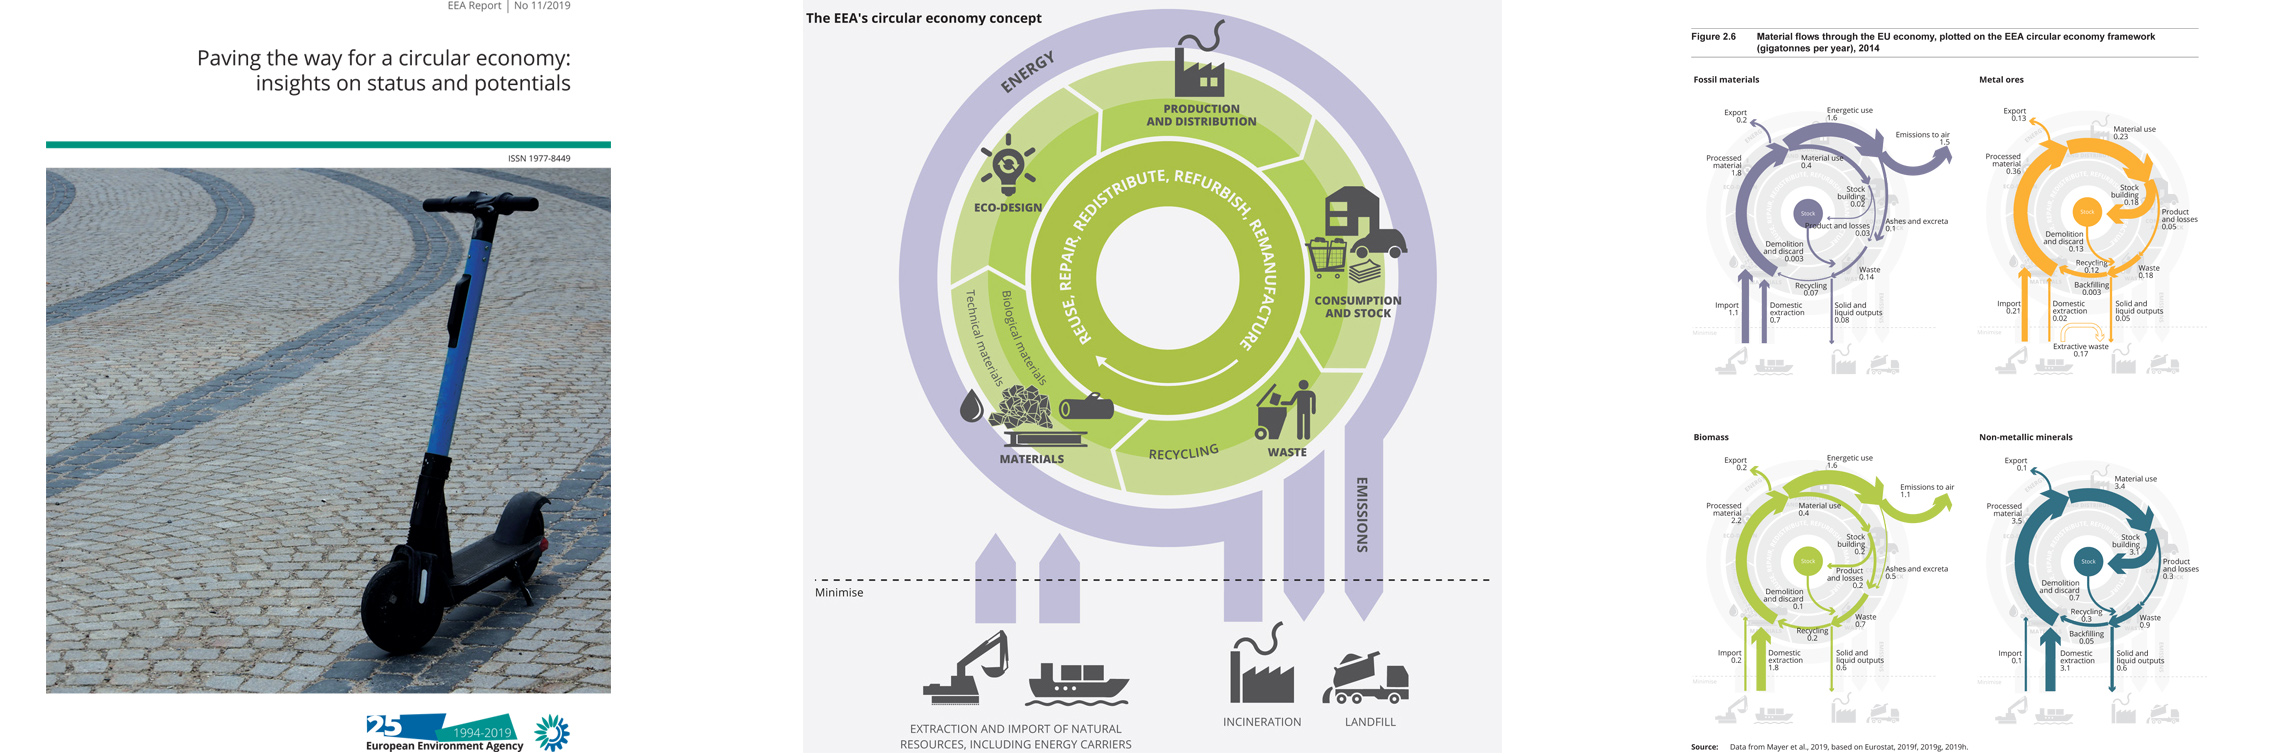 Paving the way for a circular economy insights on status and potentials